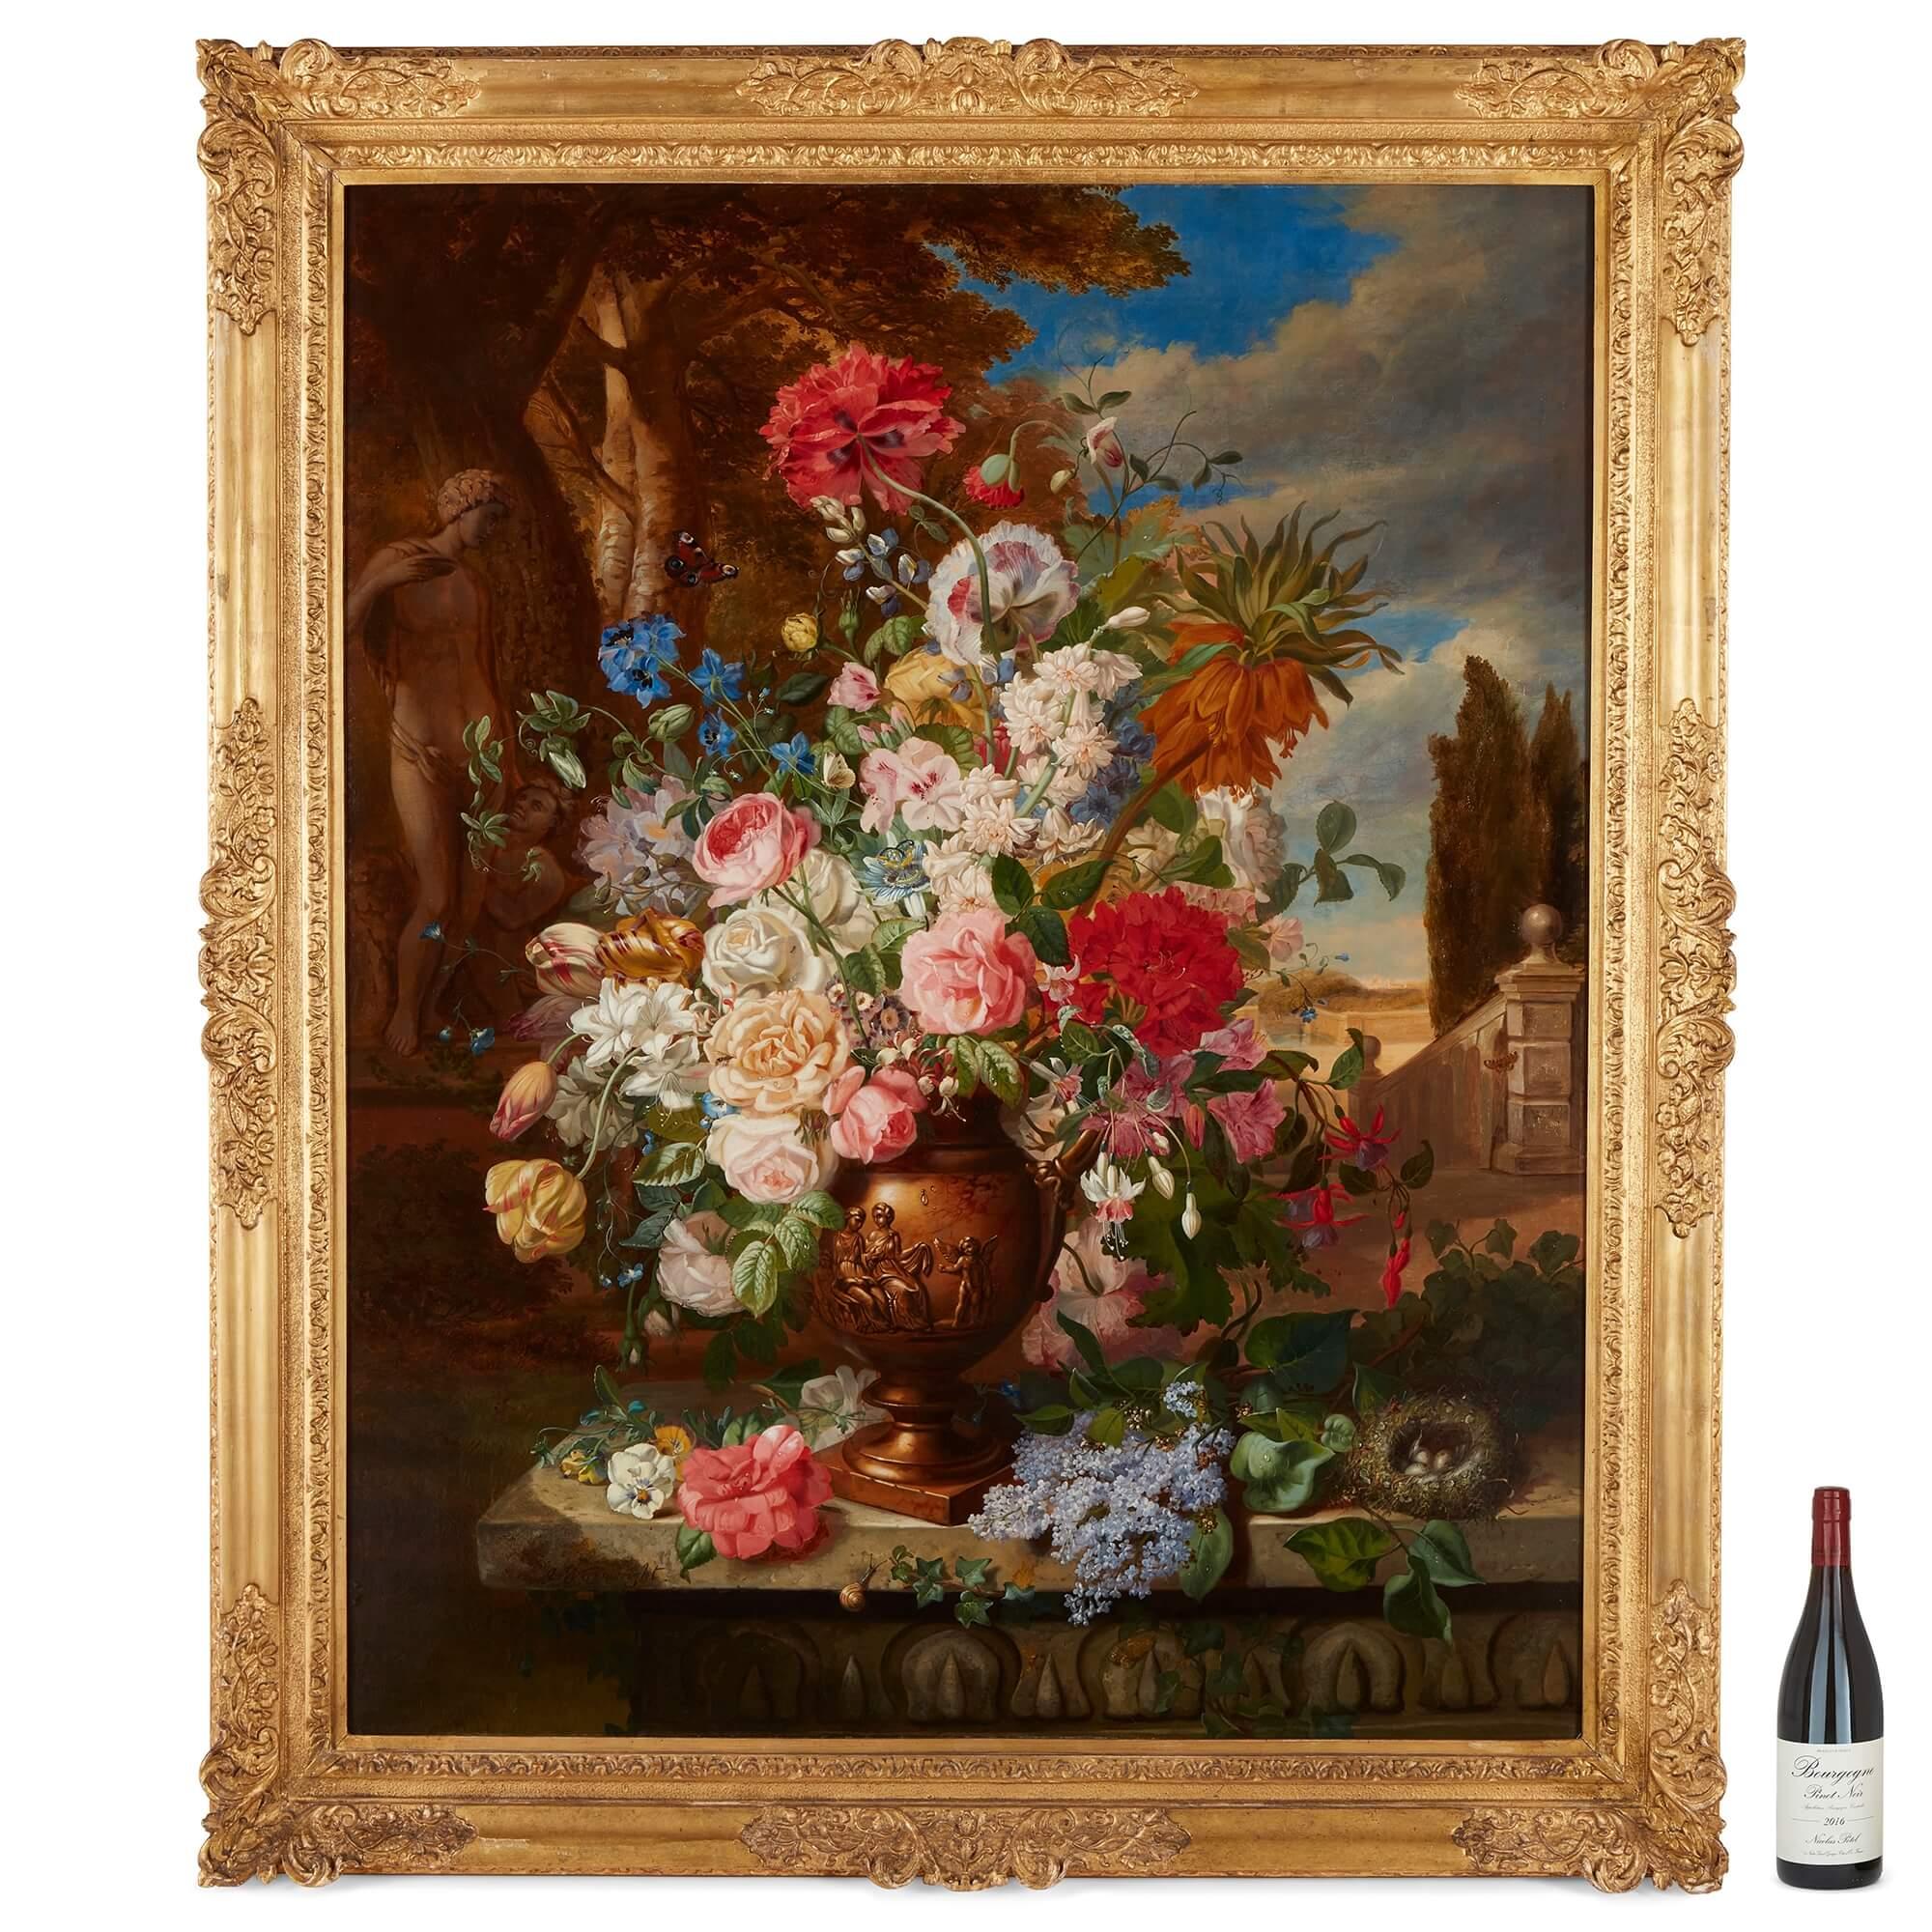 Antique still life of flowers by W. J. Wainwright 
English, Late 19th Century 
Canvas: Height 127cm, width 101cm
Frame: Height 144cm, width 120cm, depth 7cm

This beautiful still life in oils depicts an overflowing vase of flowers against a